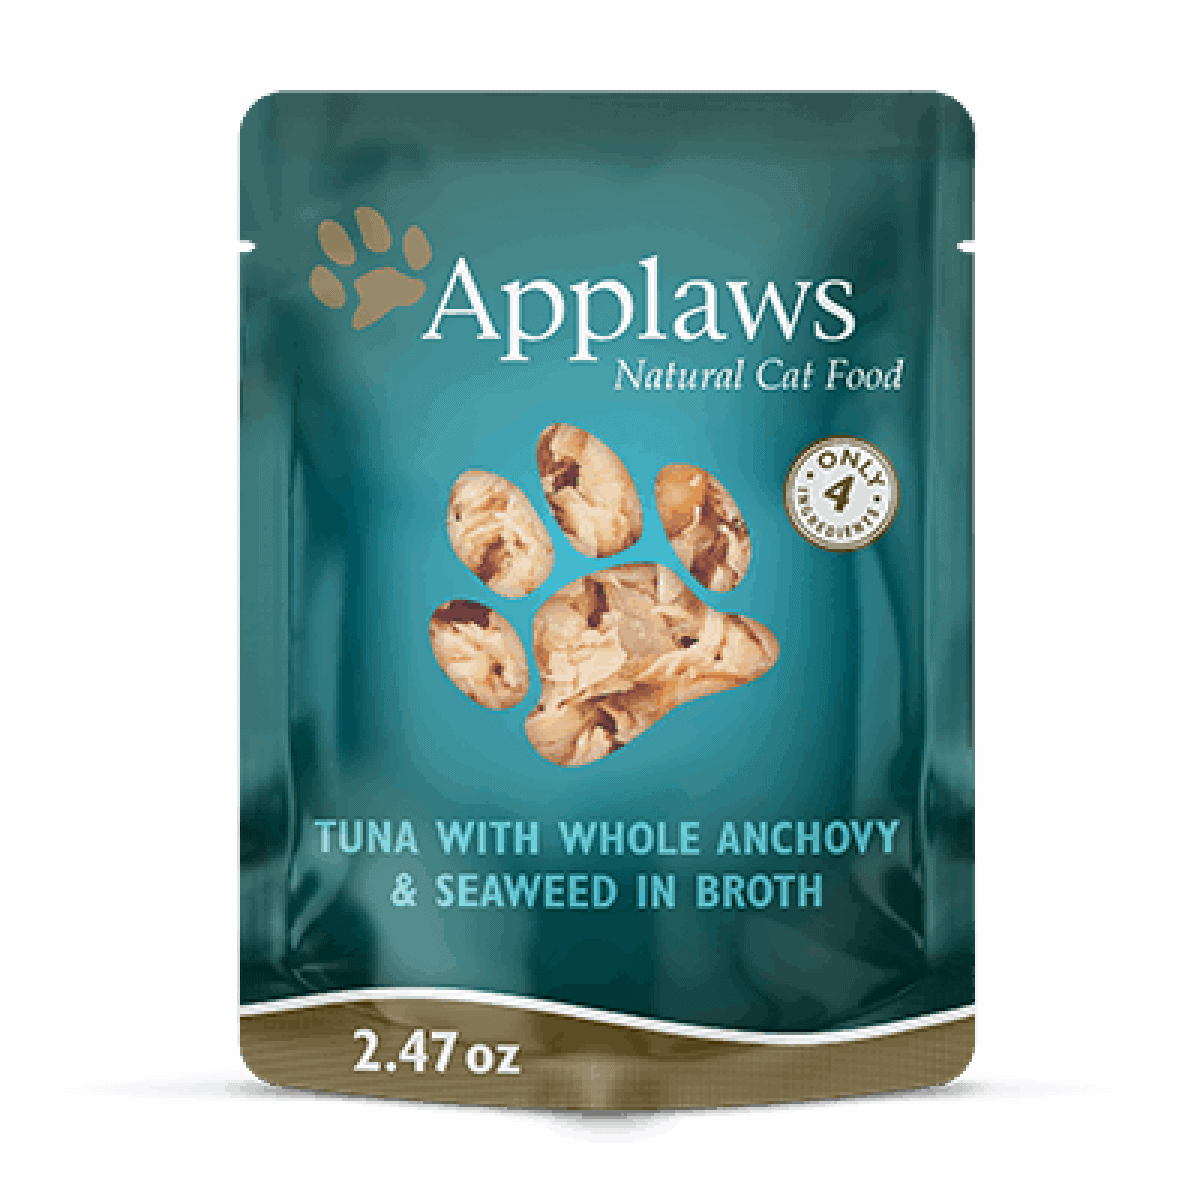 Applaws Tuna with Whole Anchovy 70g – Pawfect Supplies Ltd Product Image